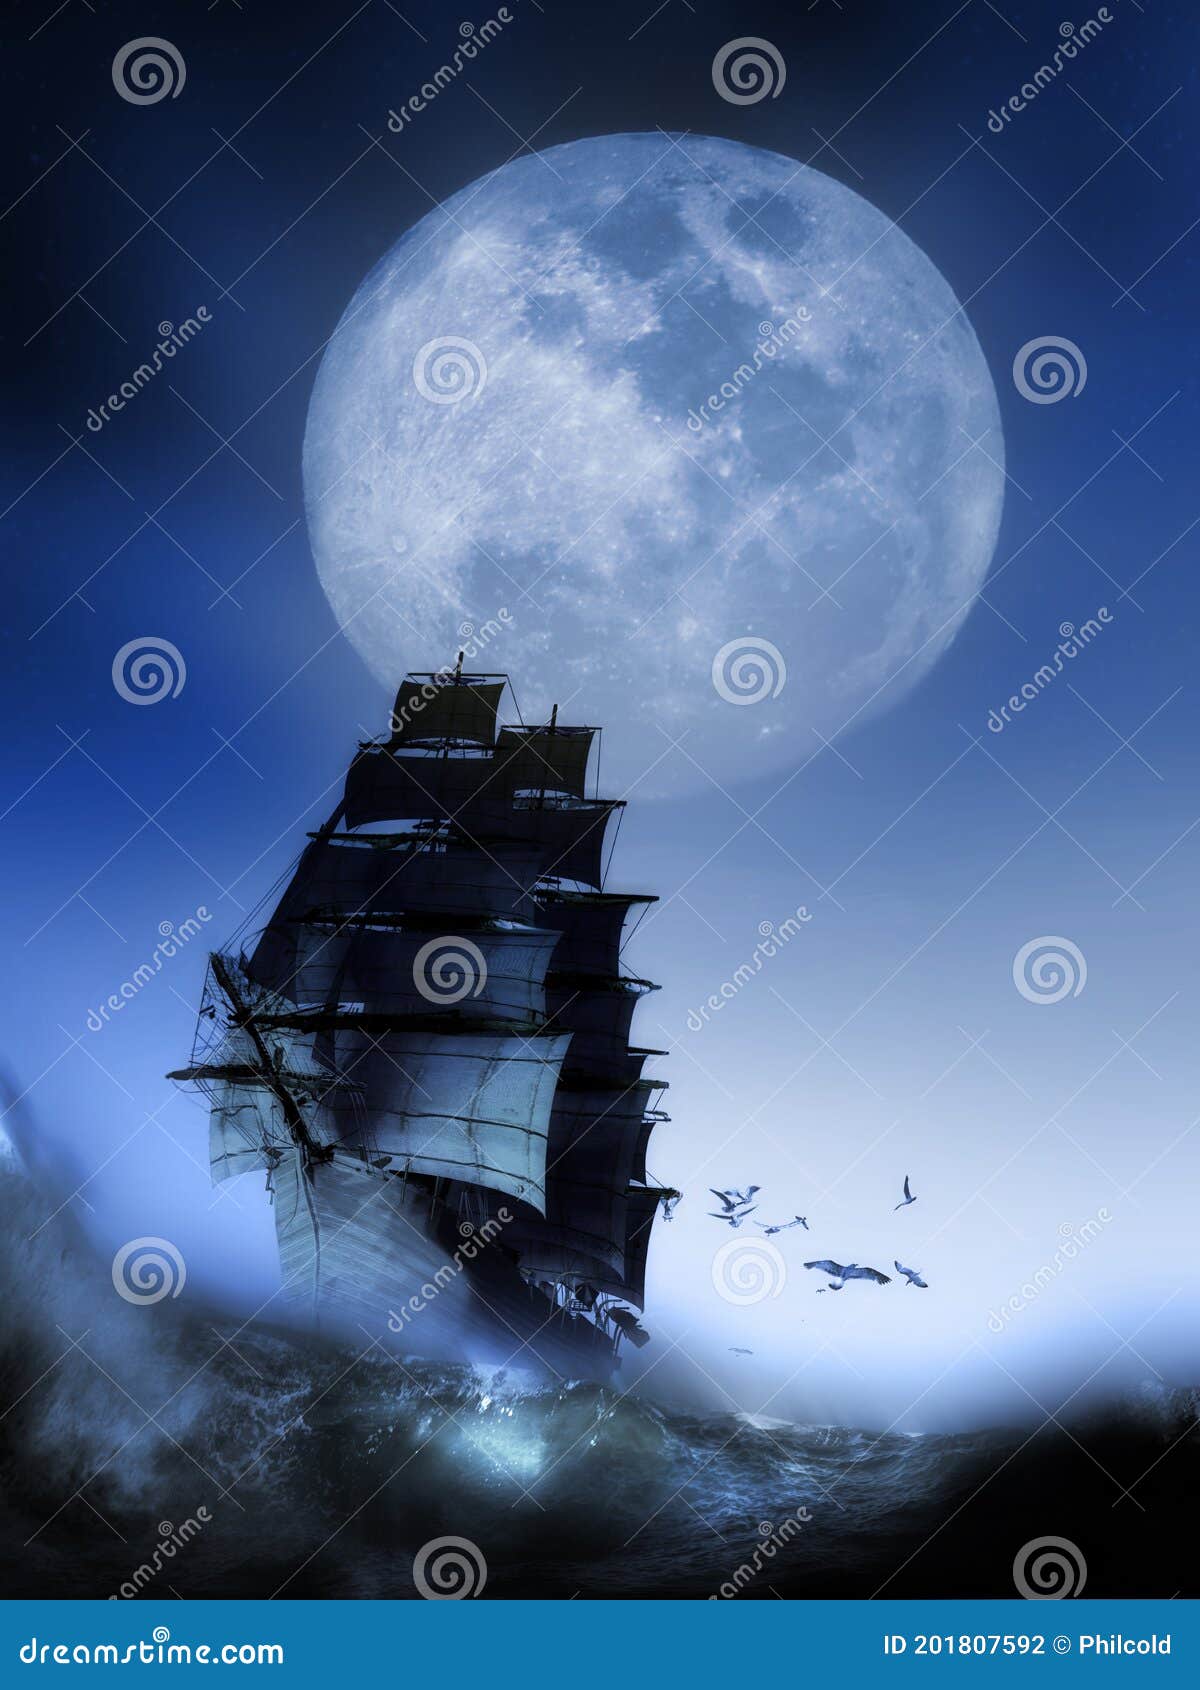 navigating under the moon